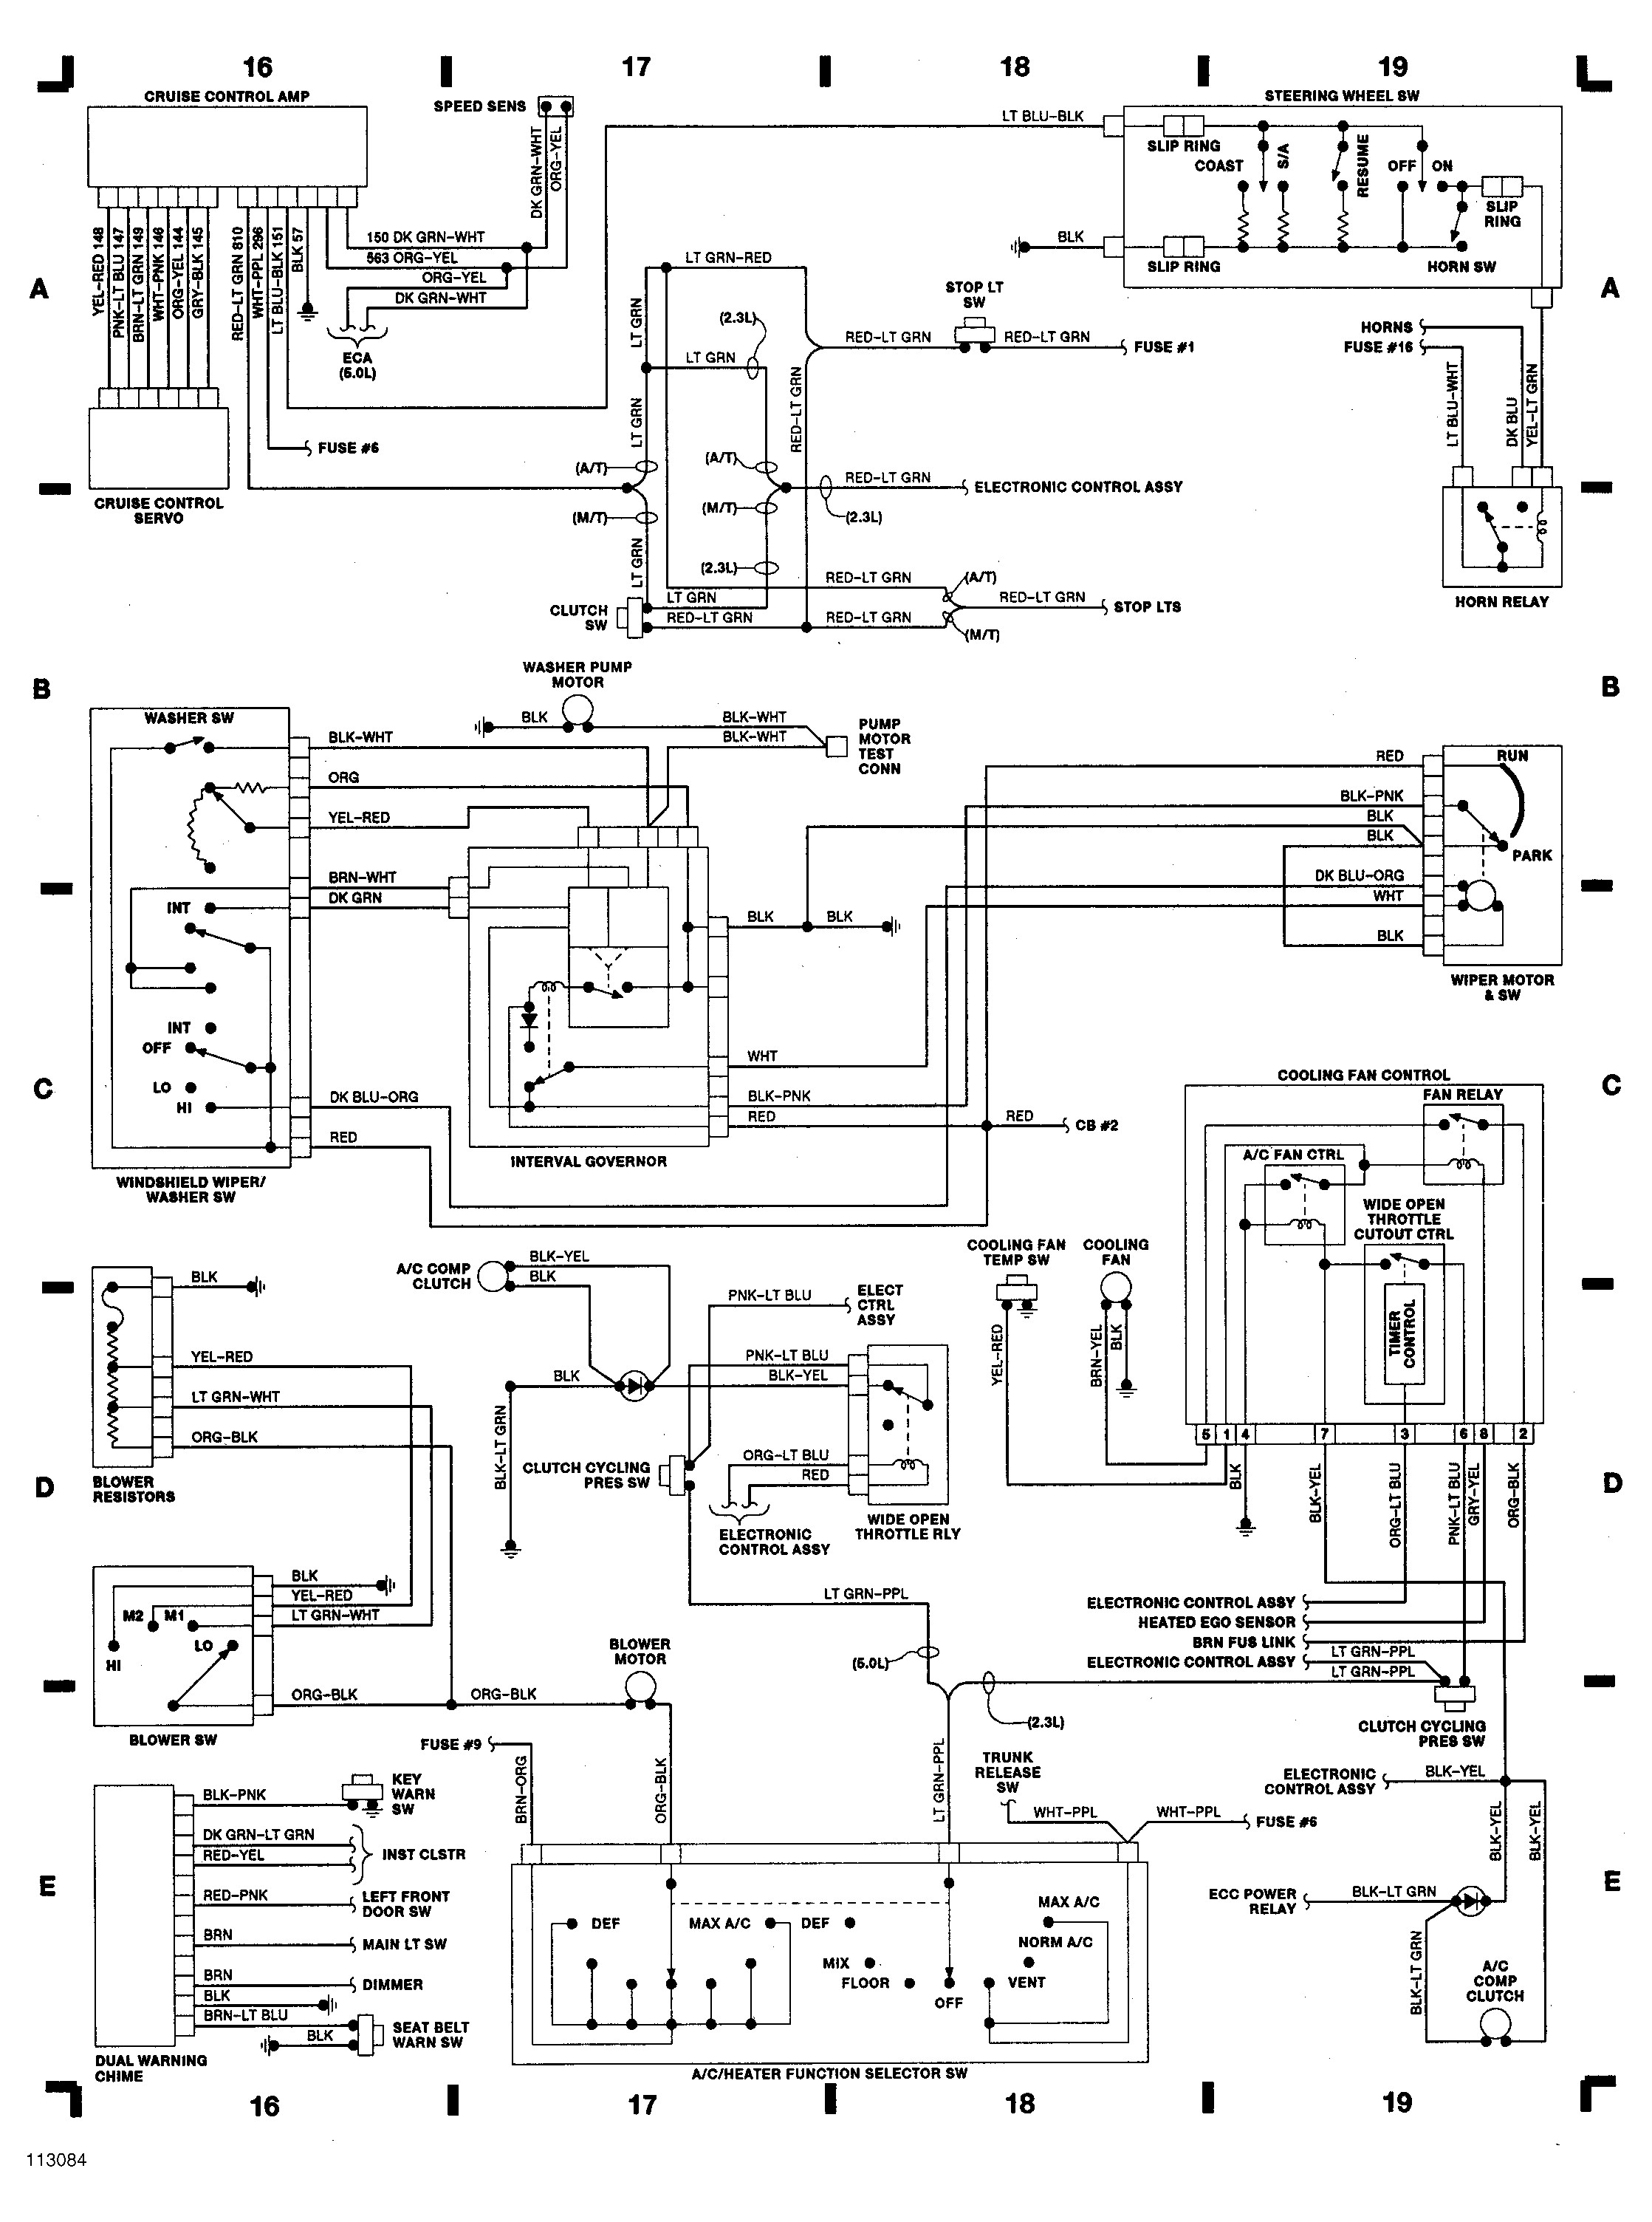 2010 ford Escape Engine Diagram 2010 ford Mustang Wiring Diagram Trusted Wiring Diagram Of 2010 ford Escape Engine Diagram